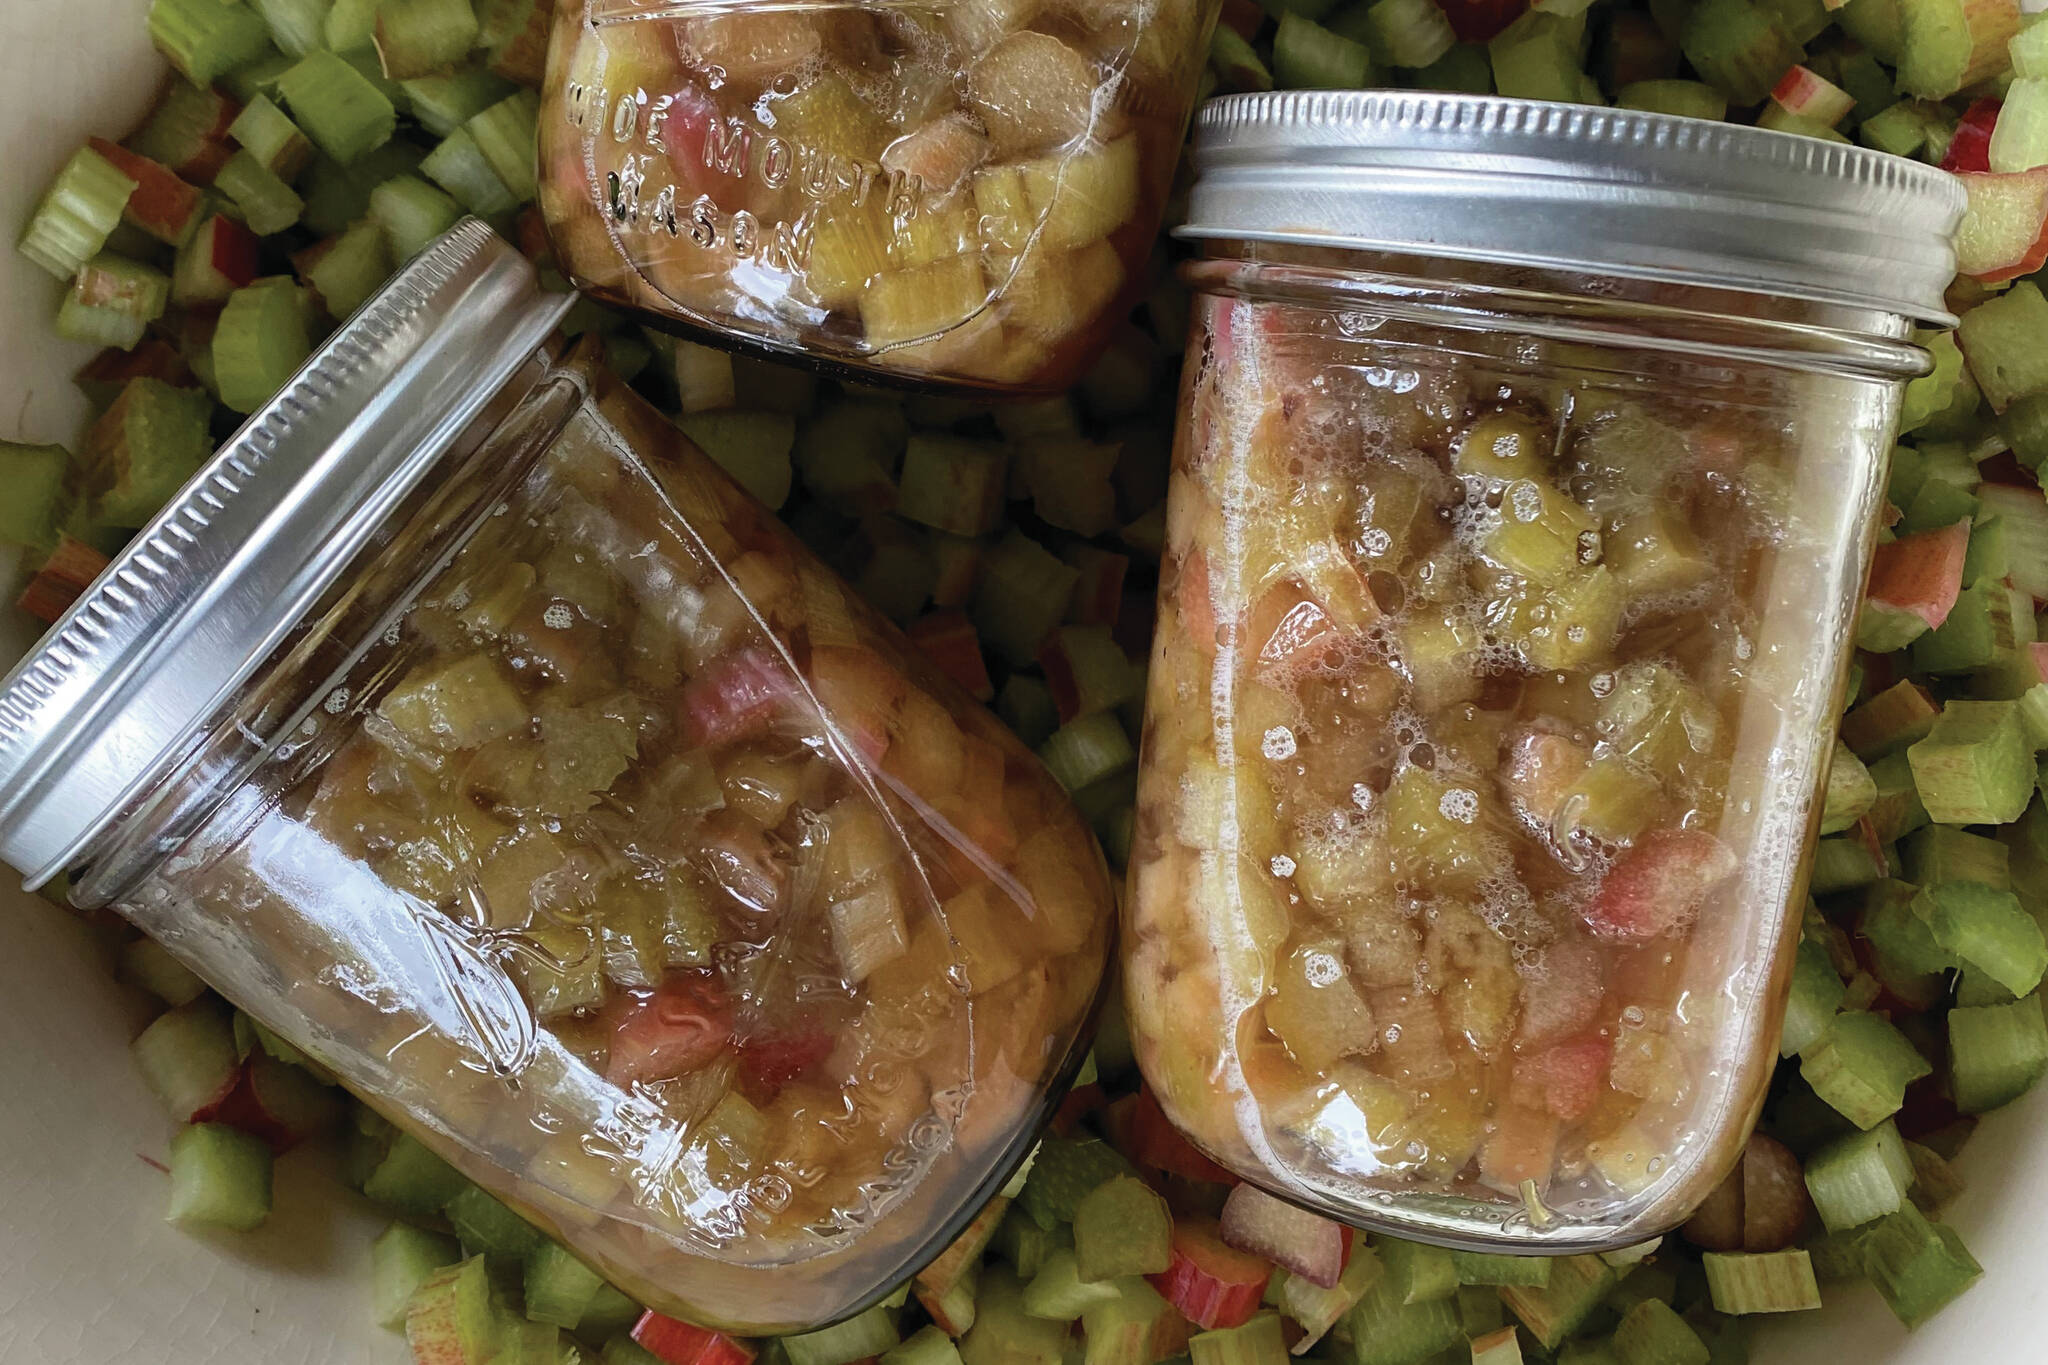 Rhubarb is preserved in jars. (Photo by Tressa Dale/Peninsula Clarion)